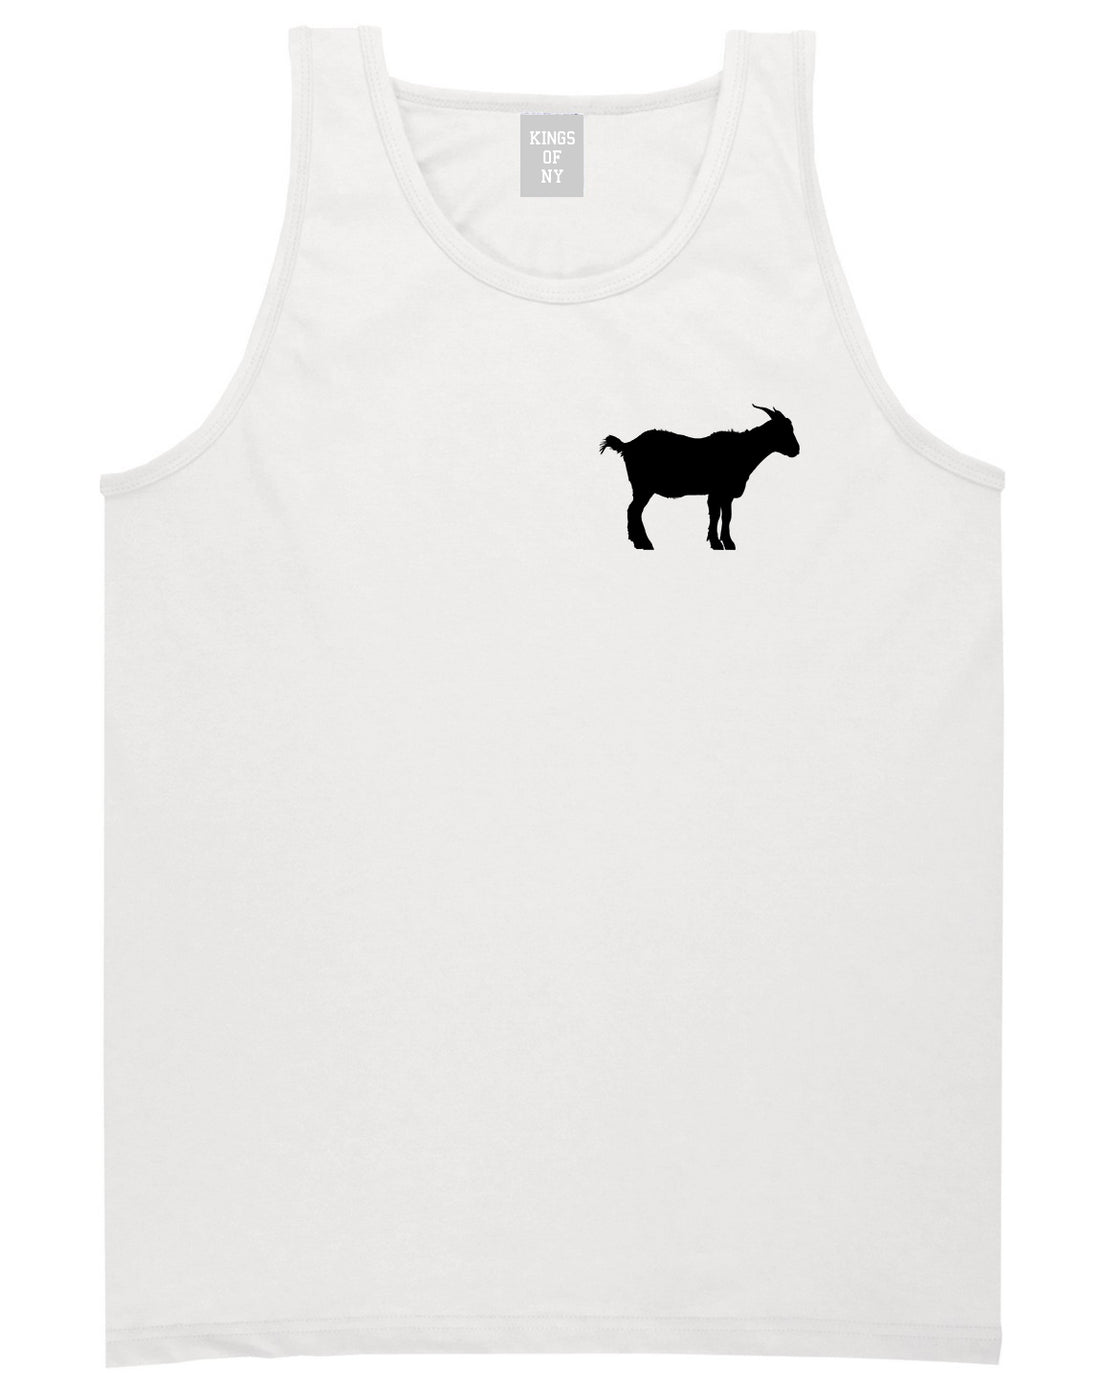 Goat Animal Chest Mens White Tank Top Shirt by KINGS OF NY